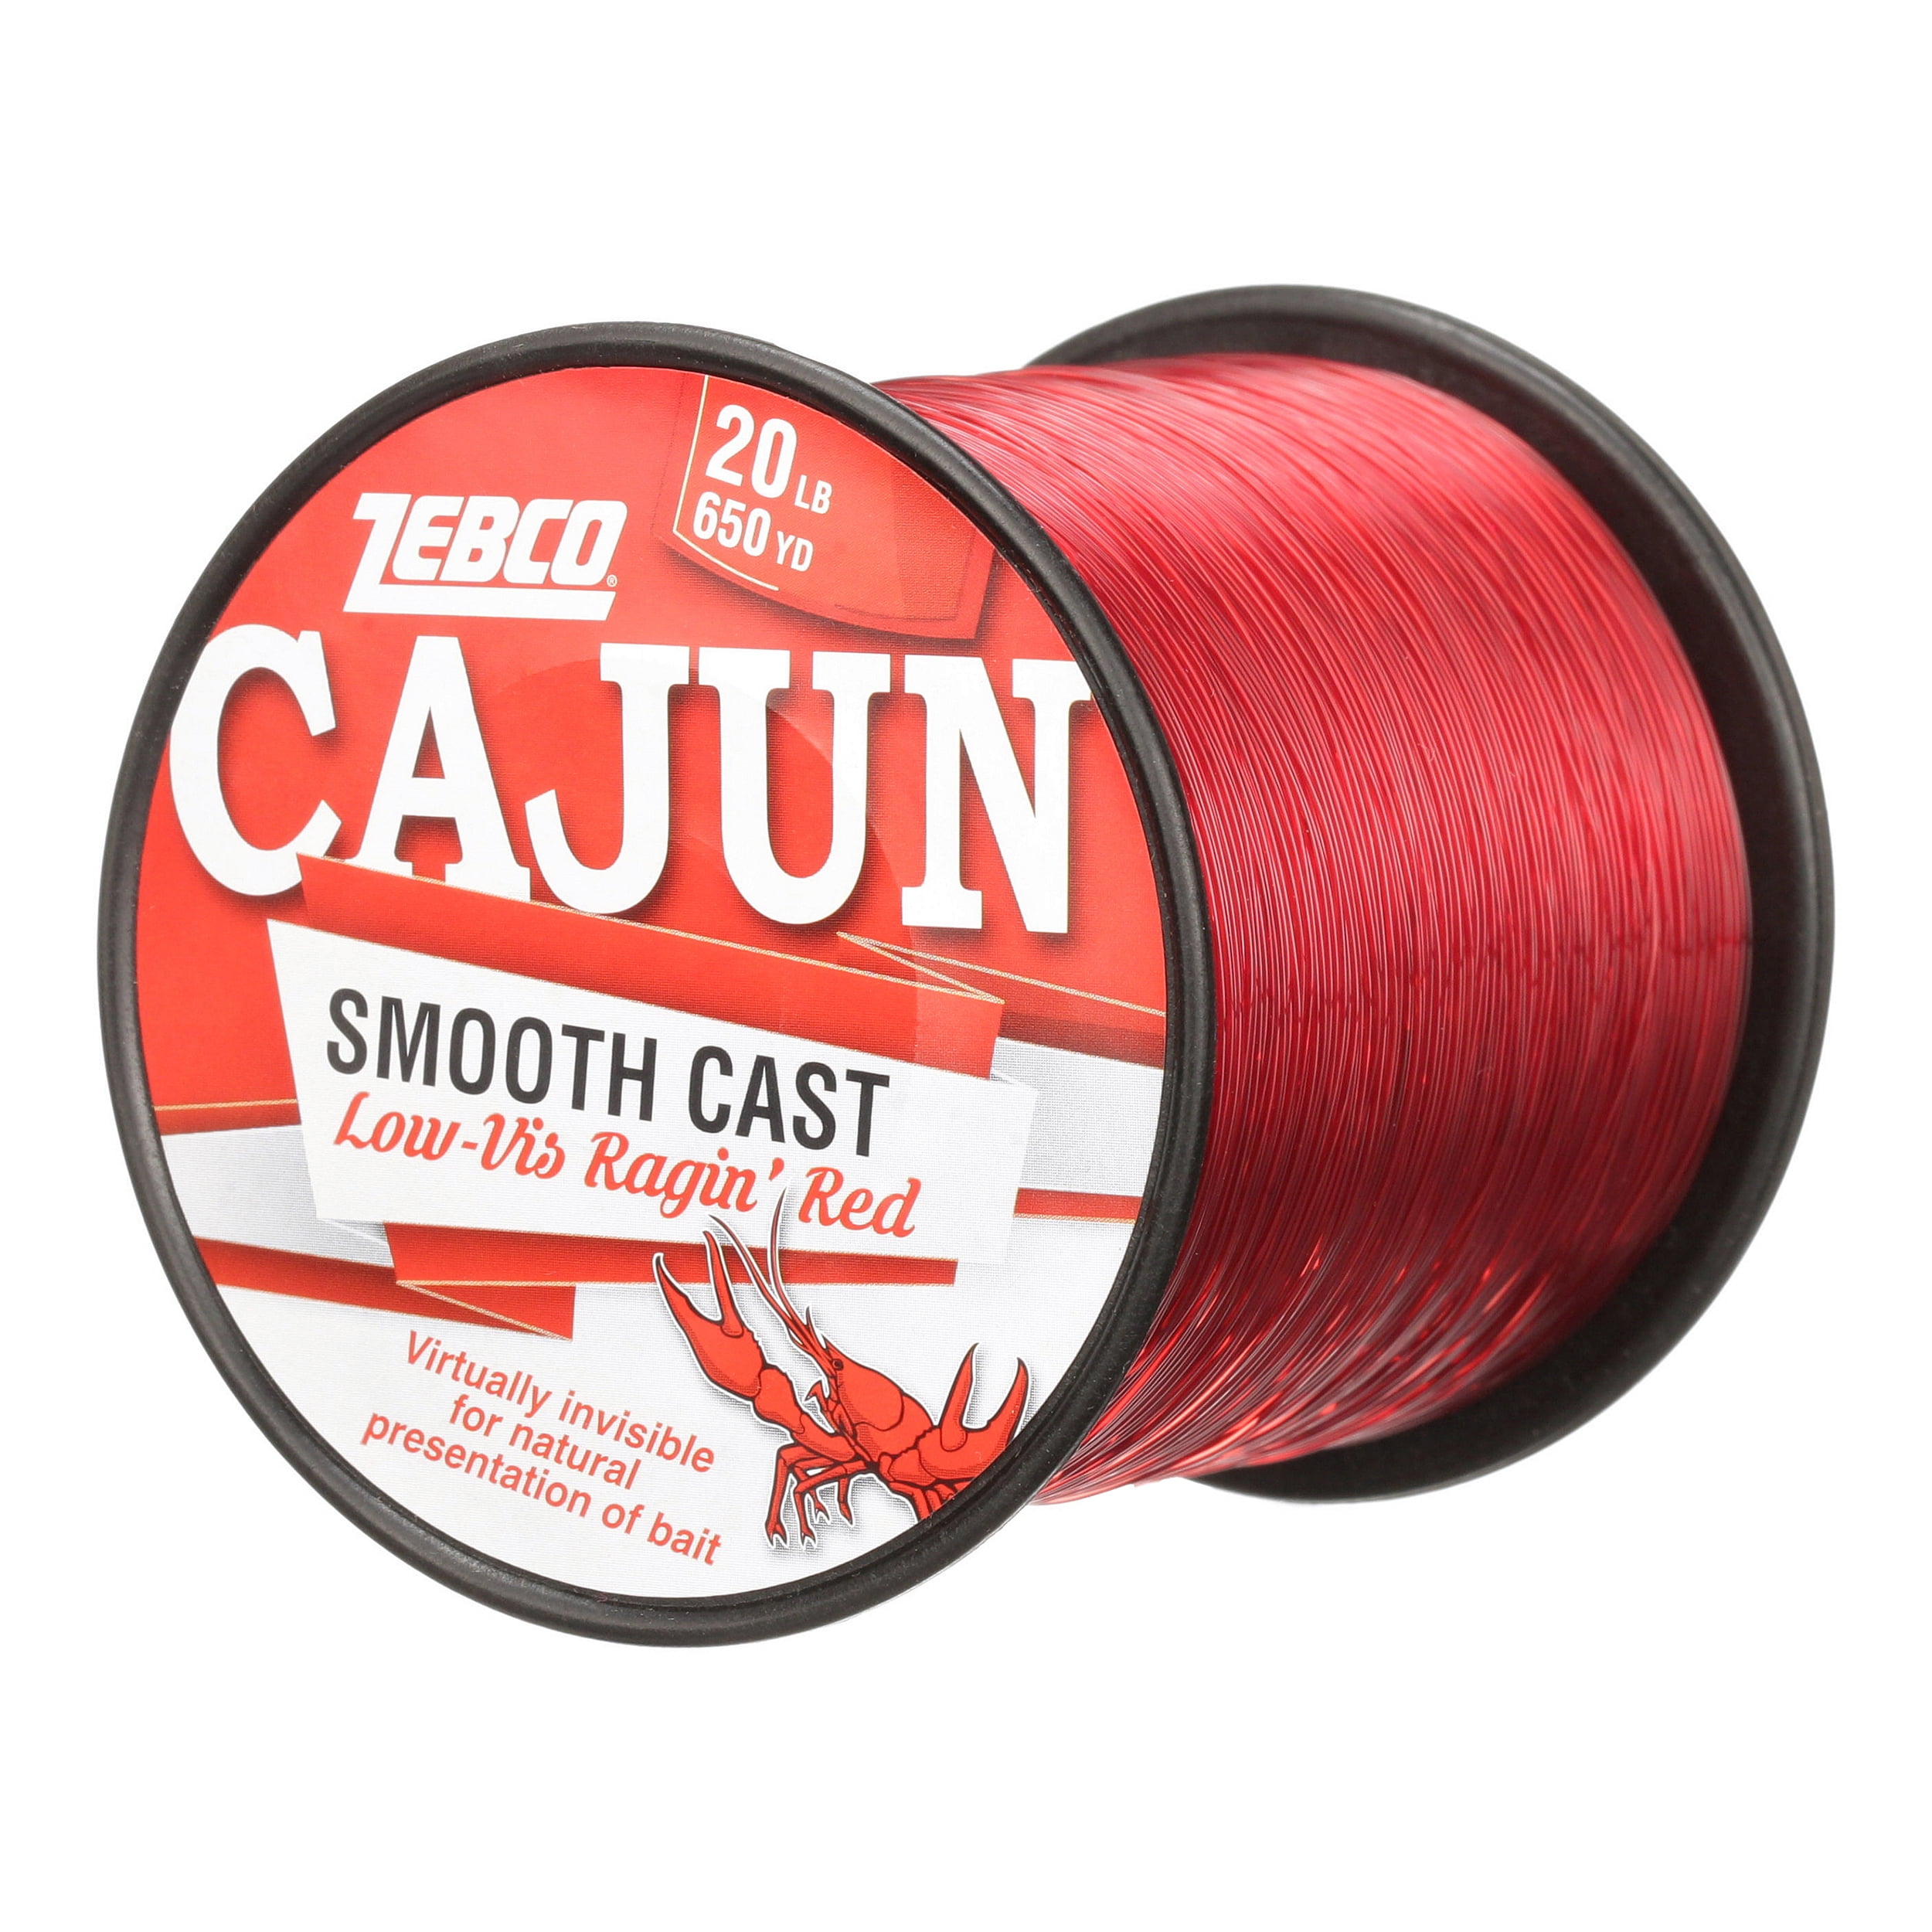 Zebco Cajun Smooth Cast Low-Vis Ragin Red Finishing Line 12 14 17 20 lb NEW!